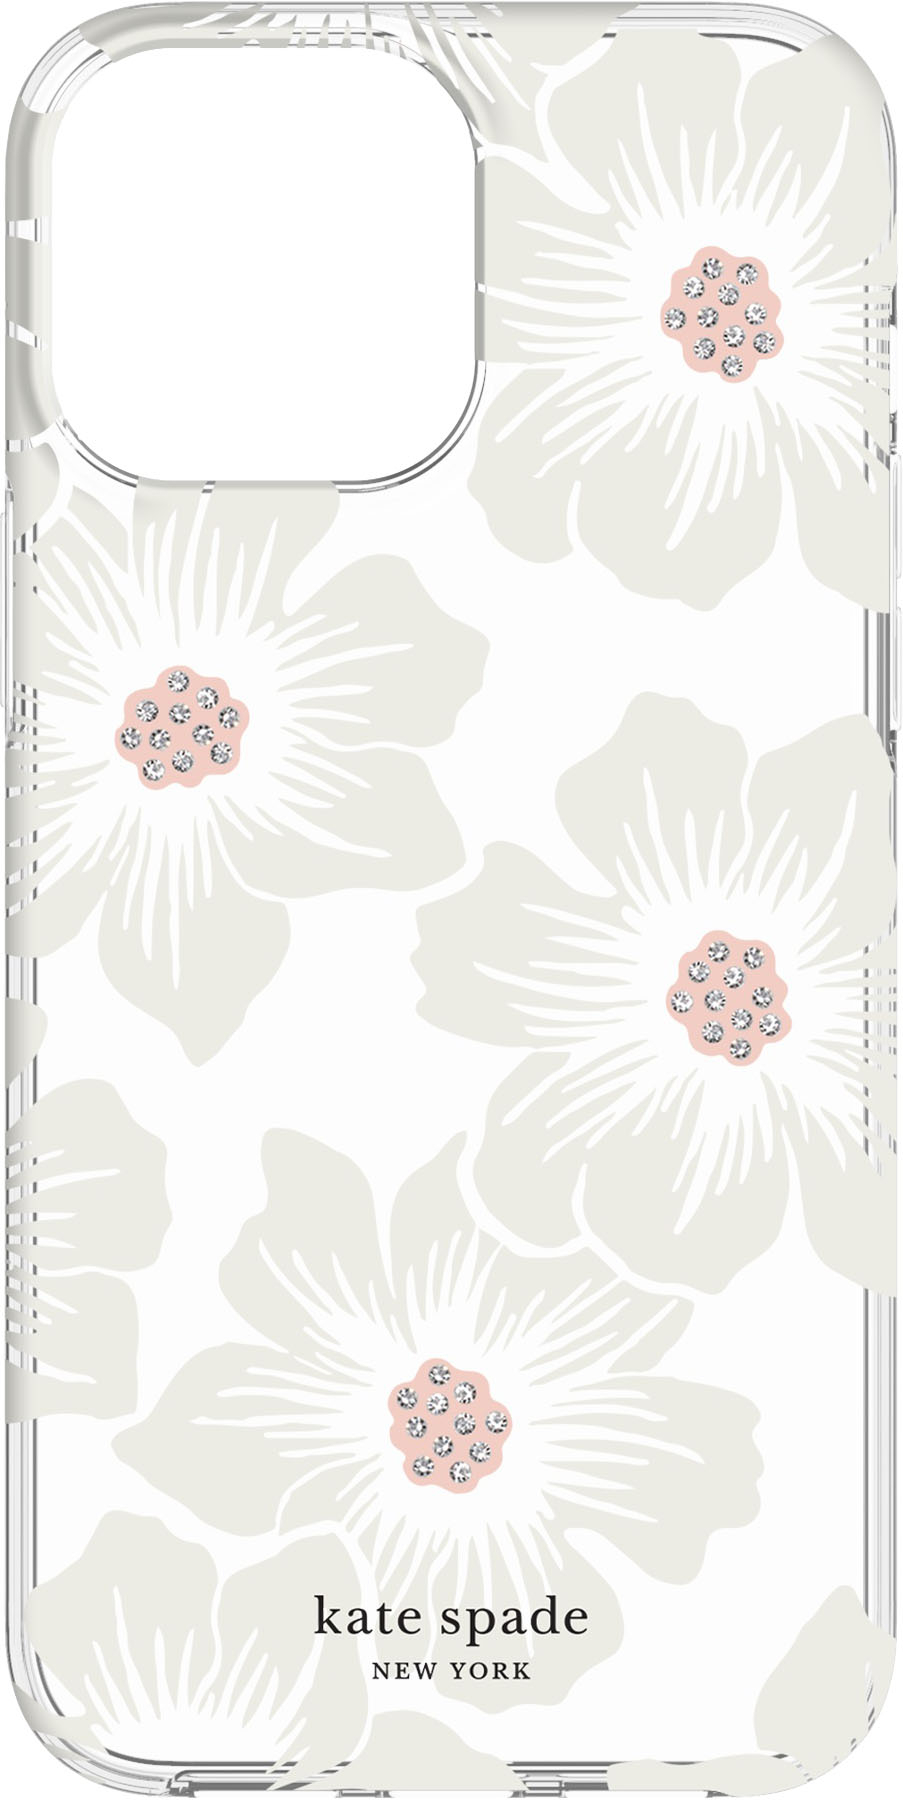 kate spade new york Protective Hardshell Case for iPhone 13/12 Pro Max  Hollyhock KSIPH-189-HHCCS - Best Buy